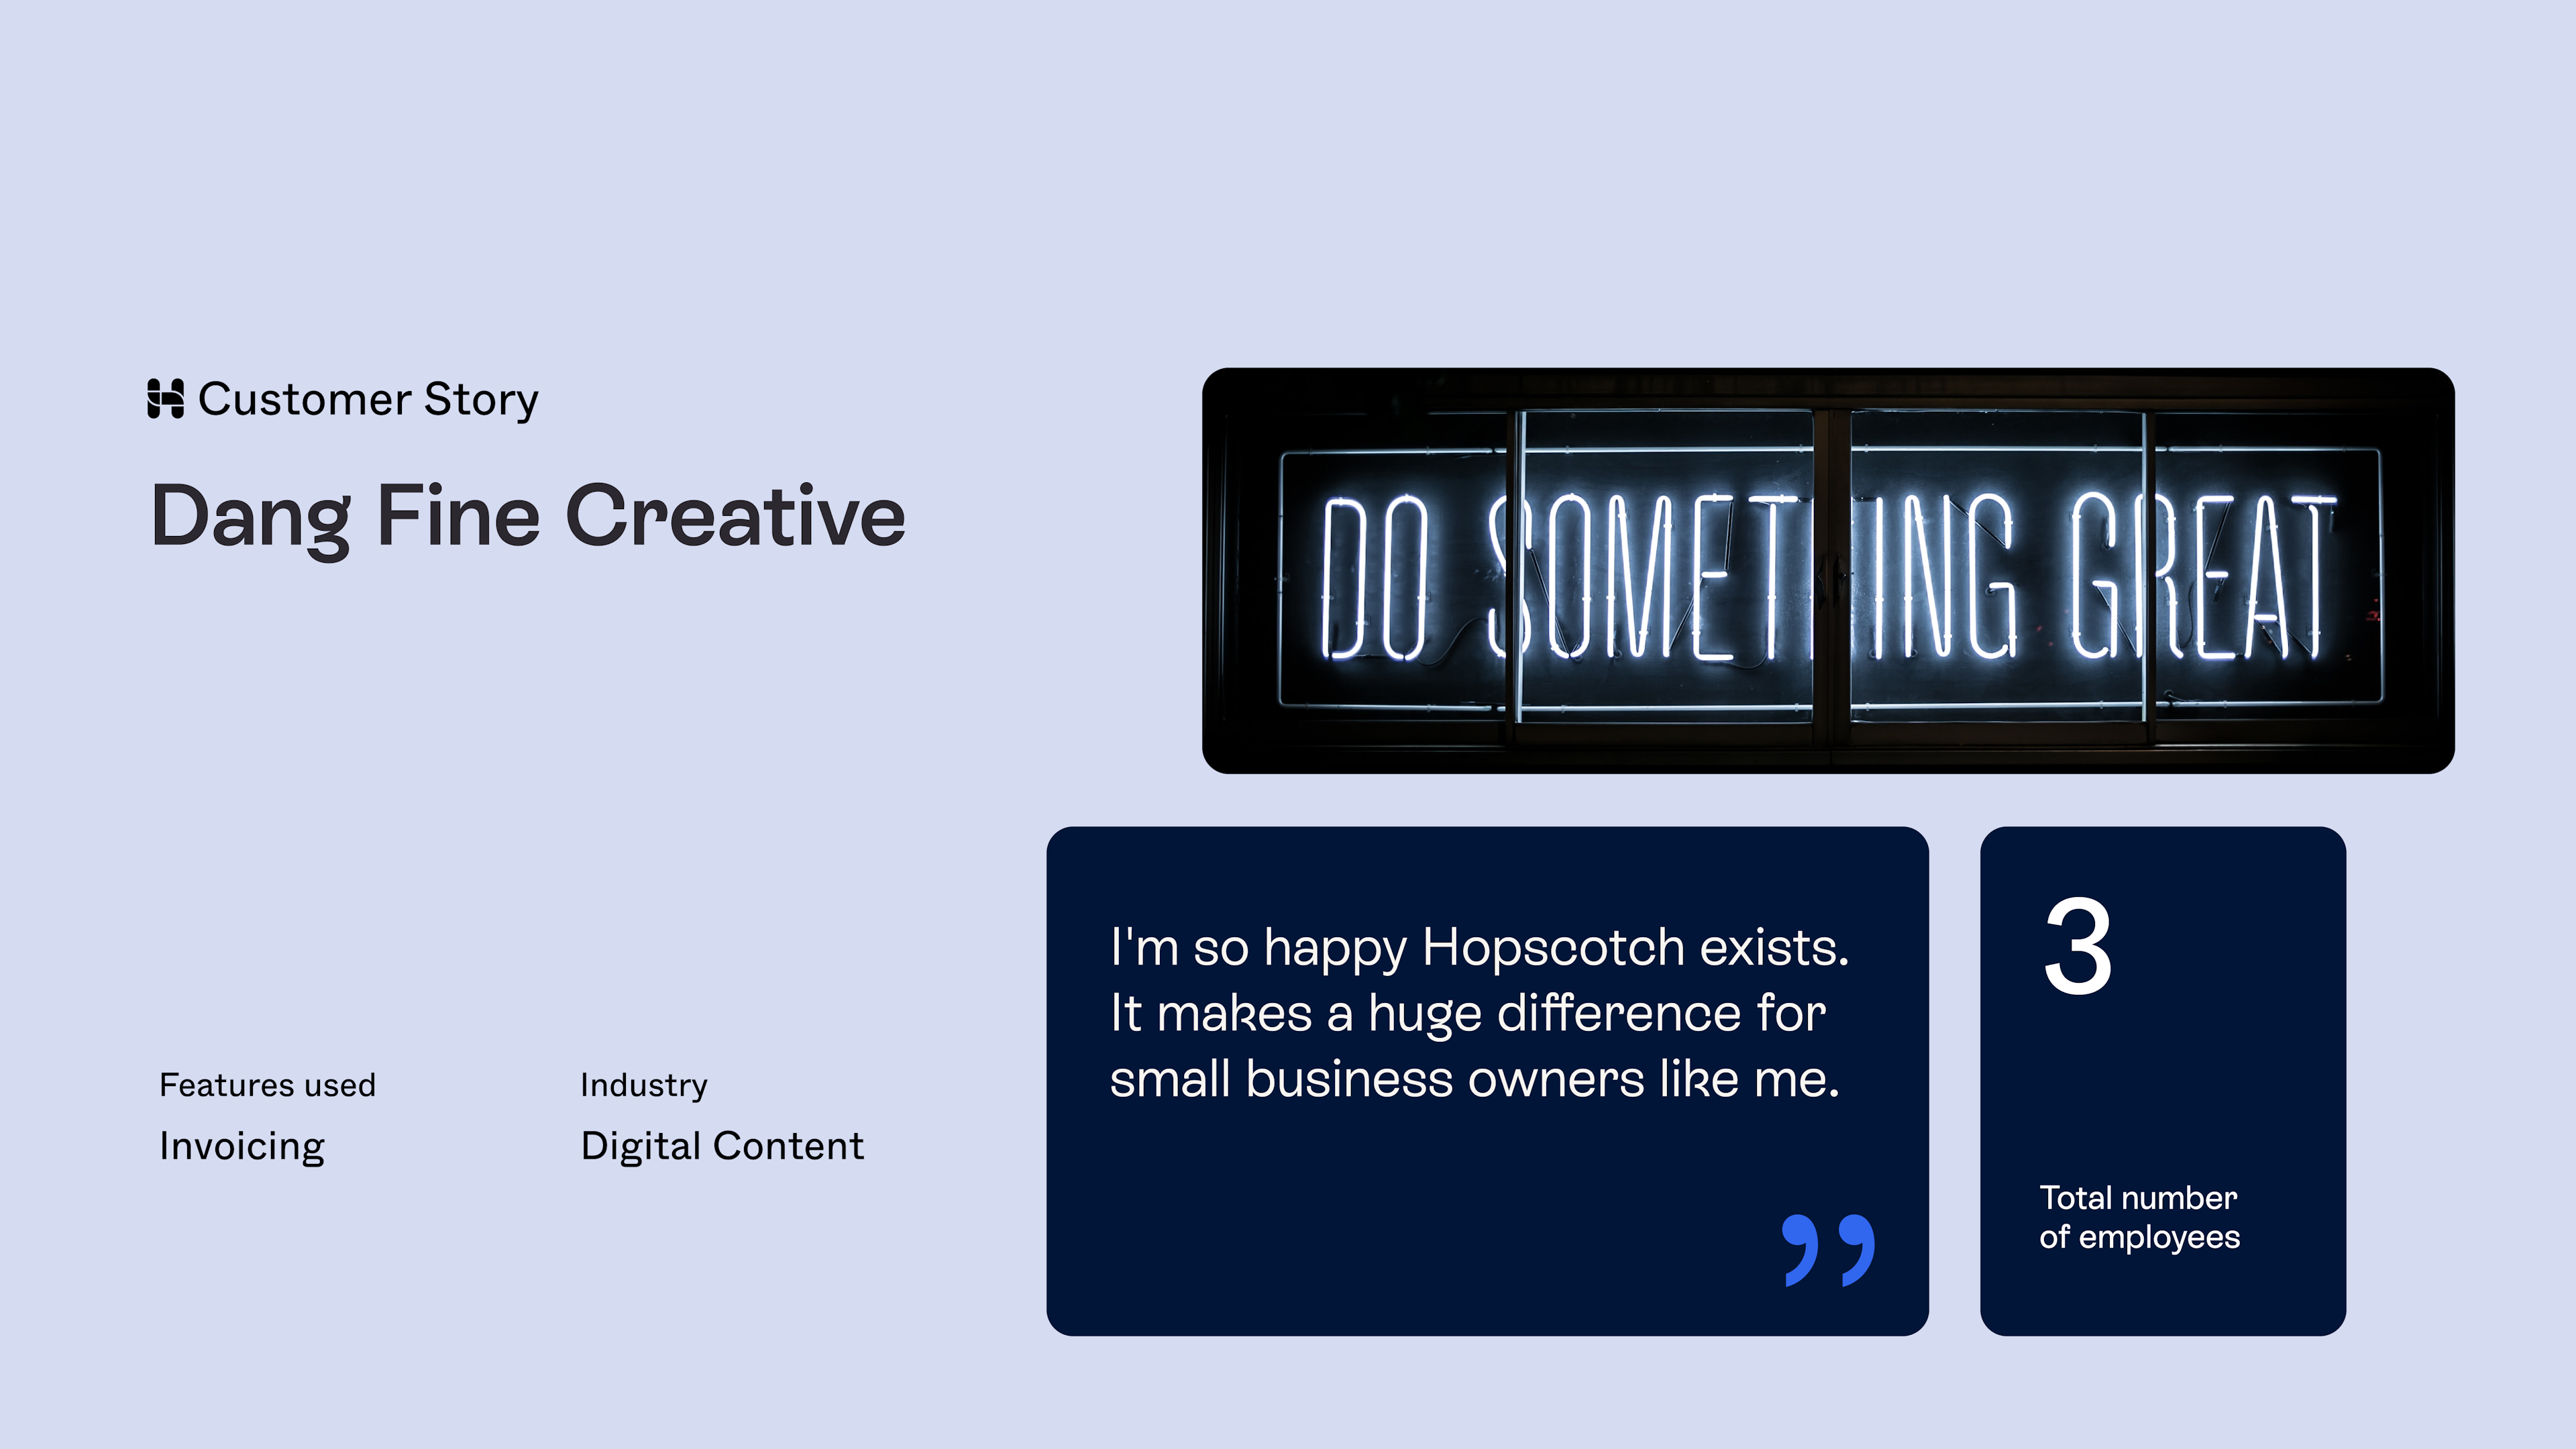 do something great with hopscotch customer story